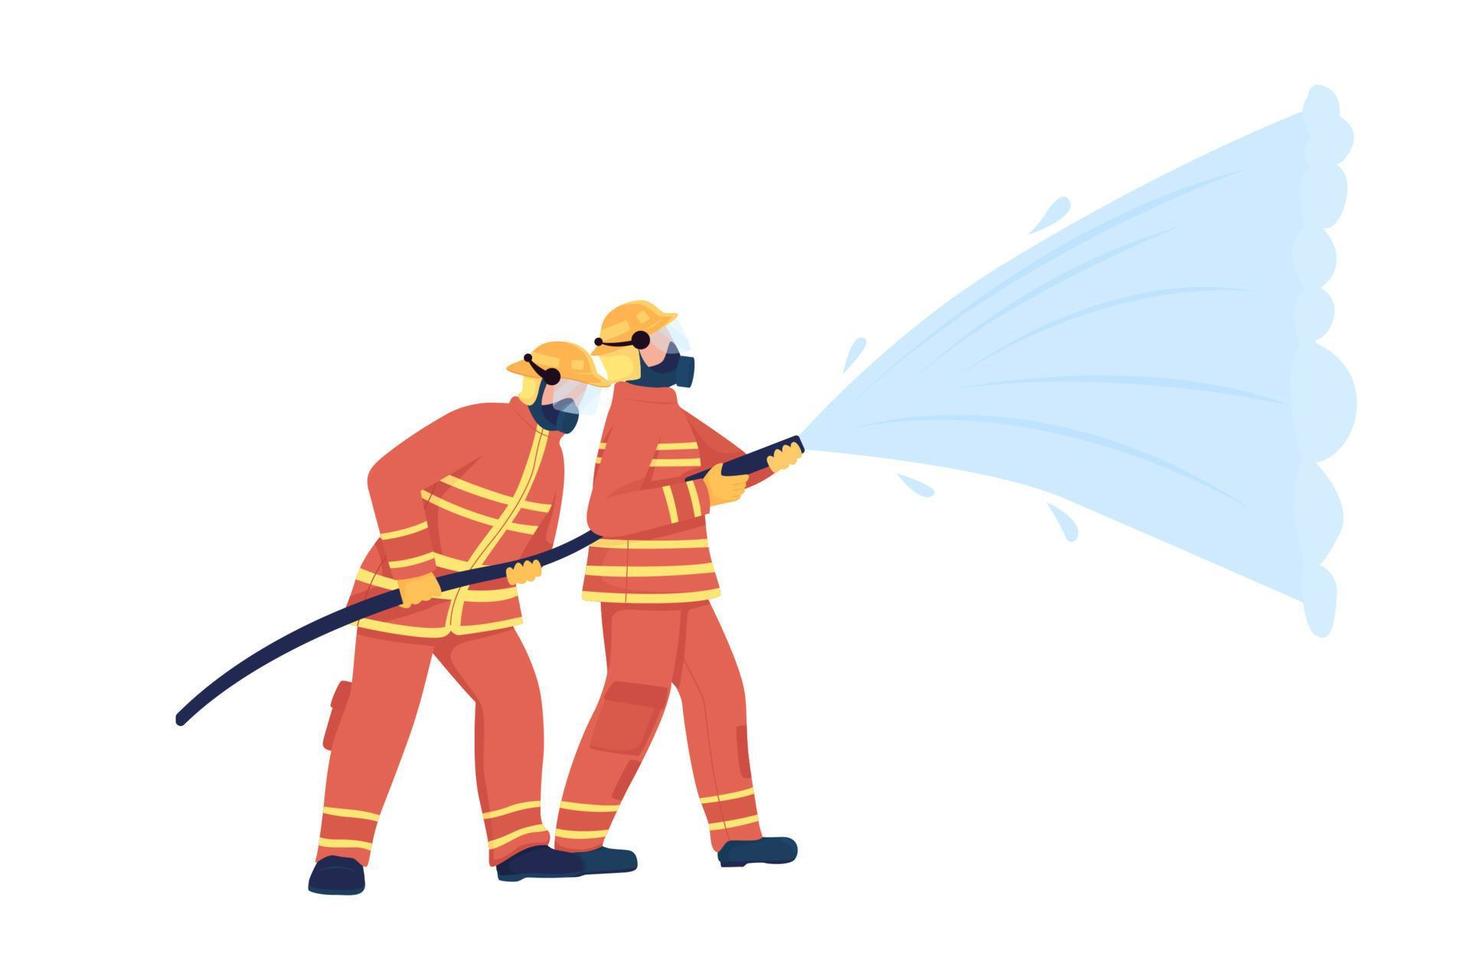 Firefighters with water hose semi flat color vector characters. Full body people on white. Suppressing wildfires isolated modern cartoon style illustration for graphic design and animation